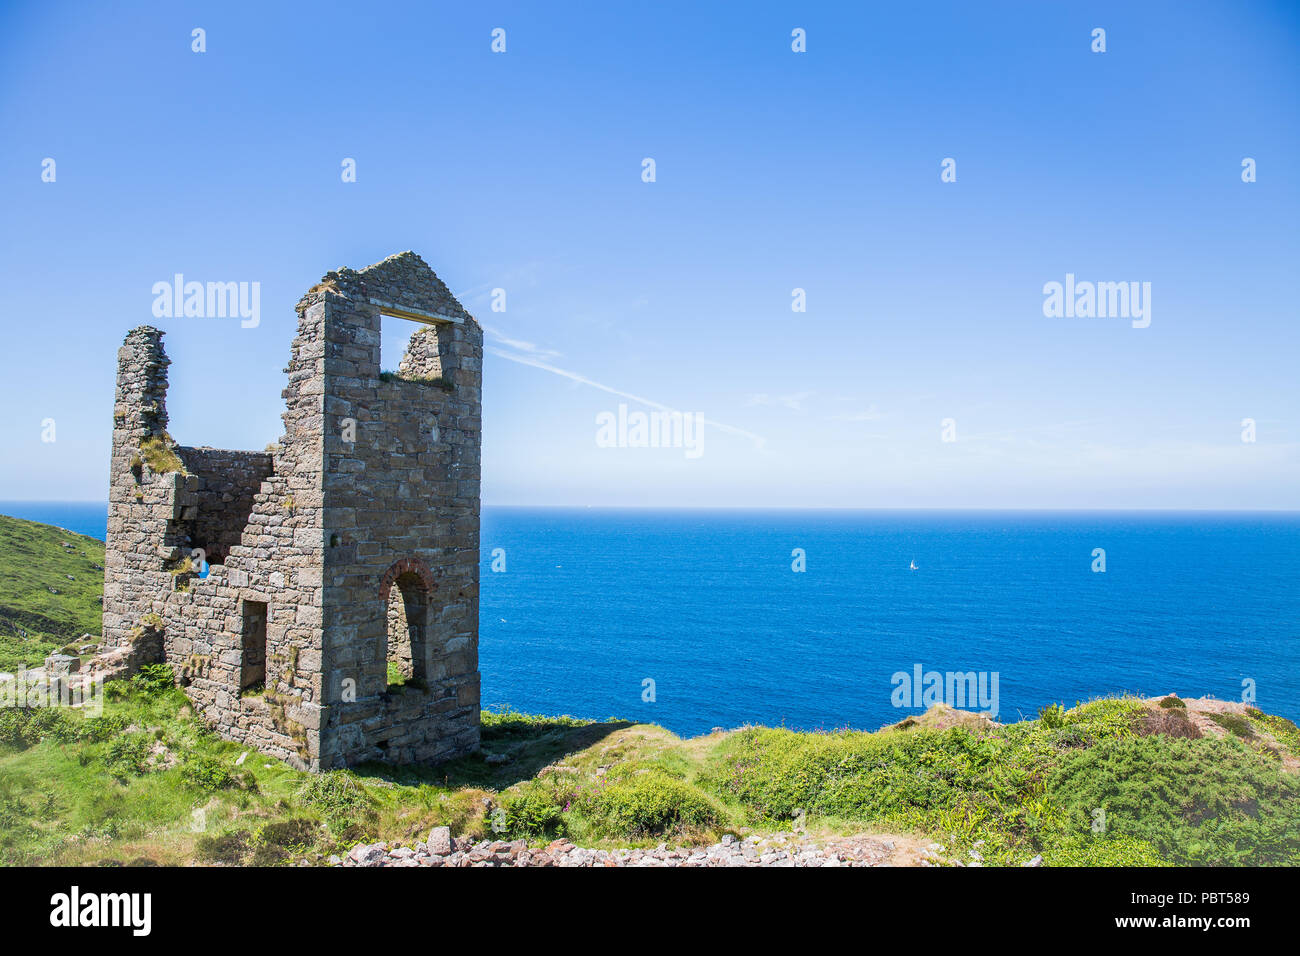 The derelict buildings of abandoned Cornish tin mines overlooking the ocean in the National Trust protected region of Botallack, Cornwall, UK. Stock Photo